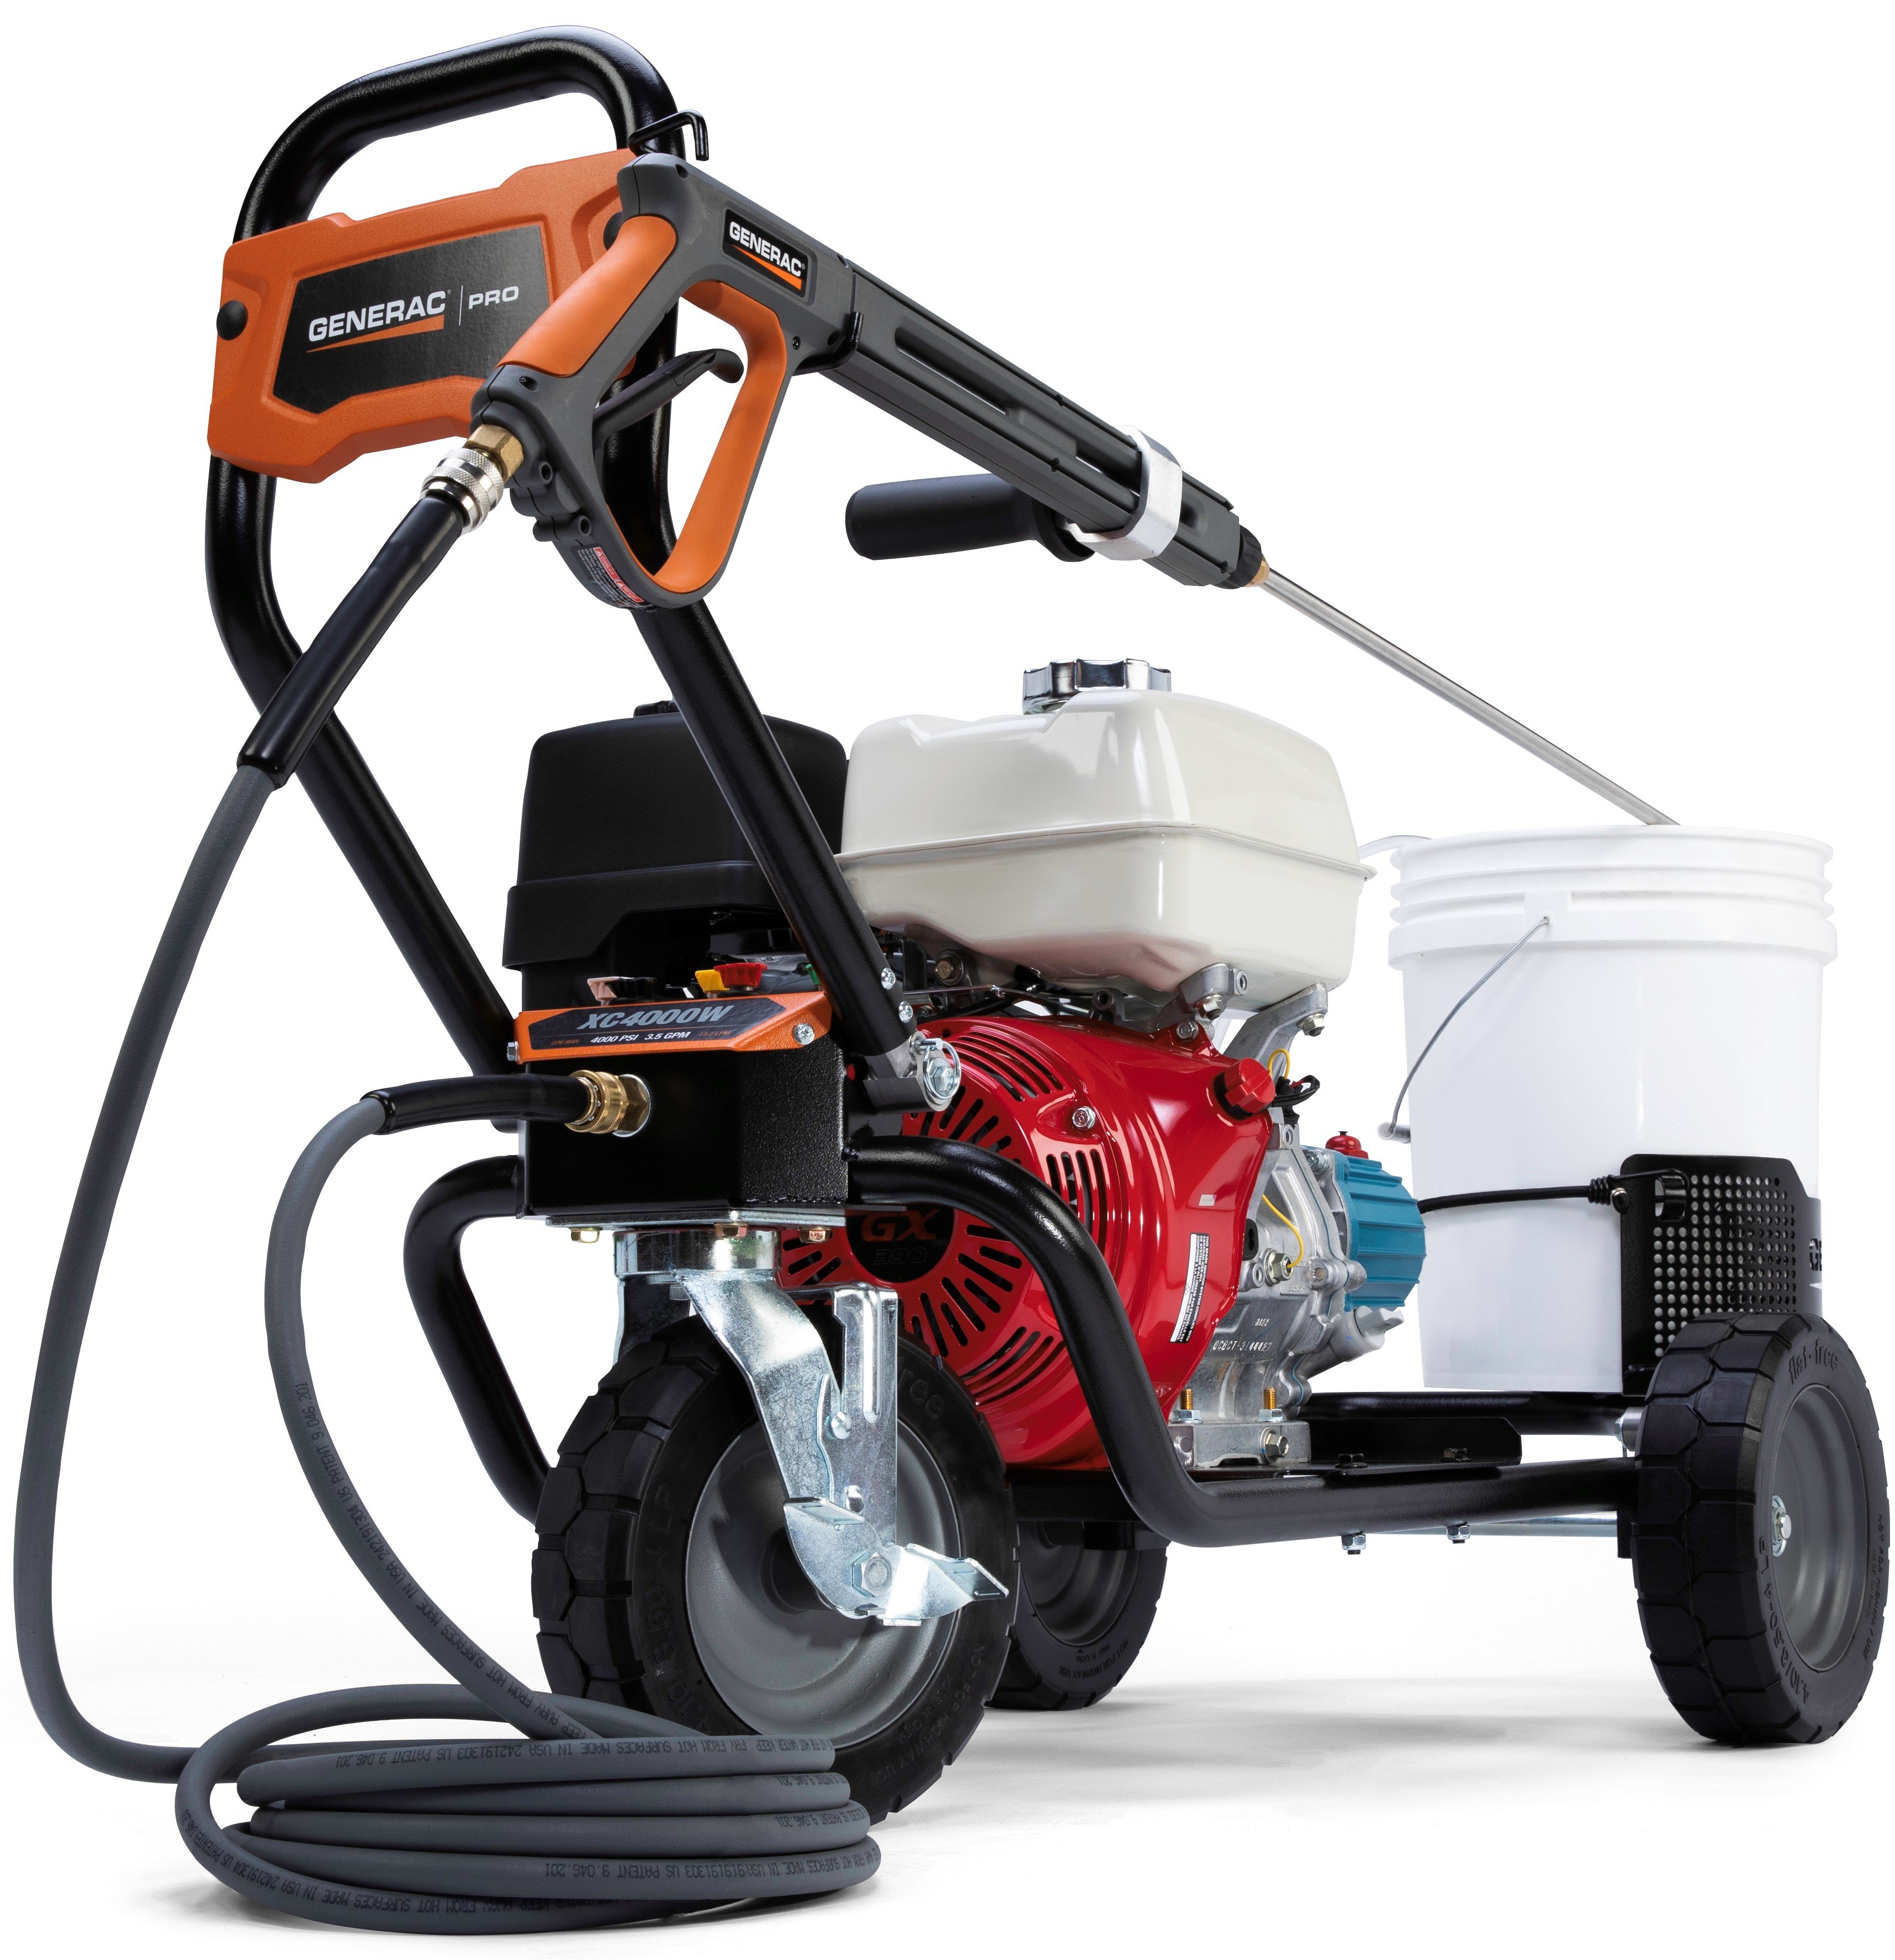 Pressure Washer 400PSI 3.5GPM Product Image